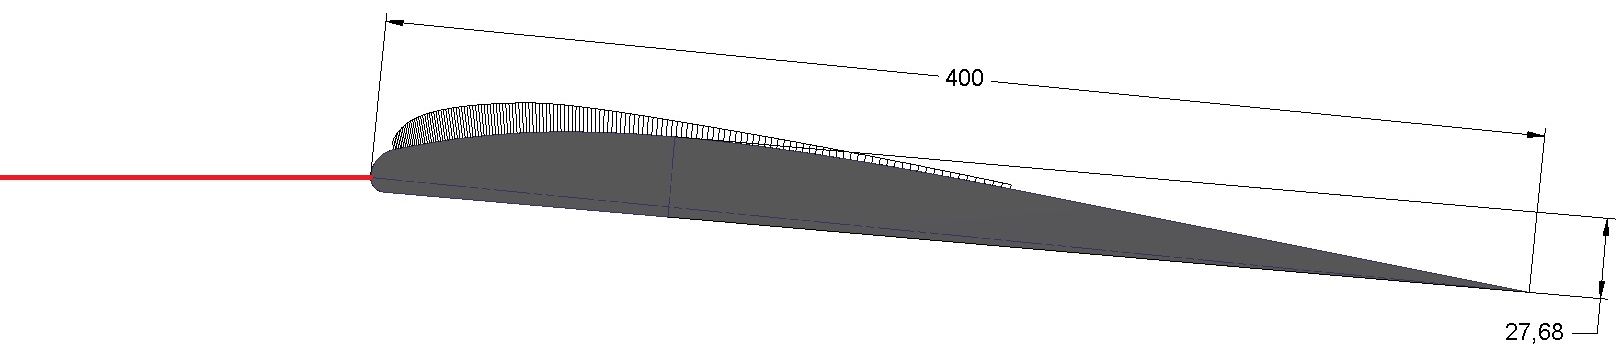 ground effect aircraft airfoil